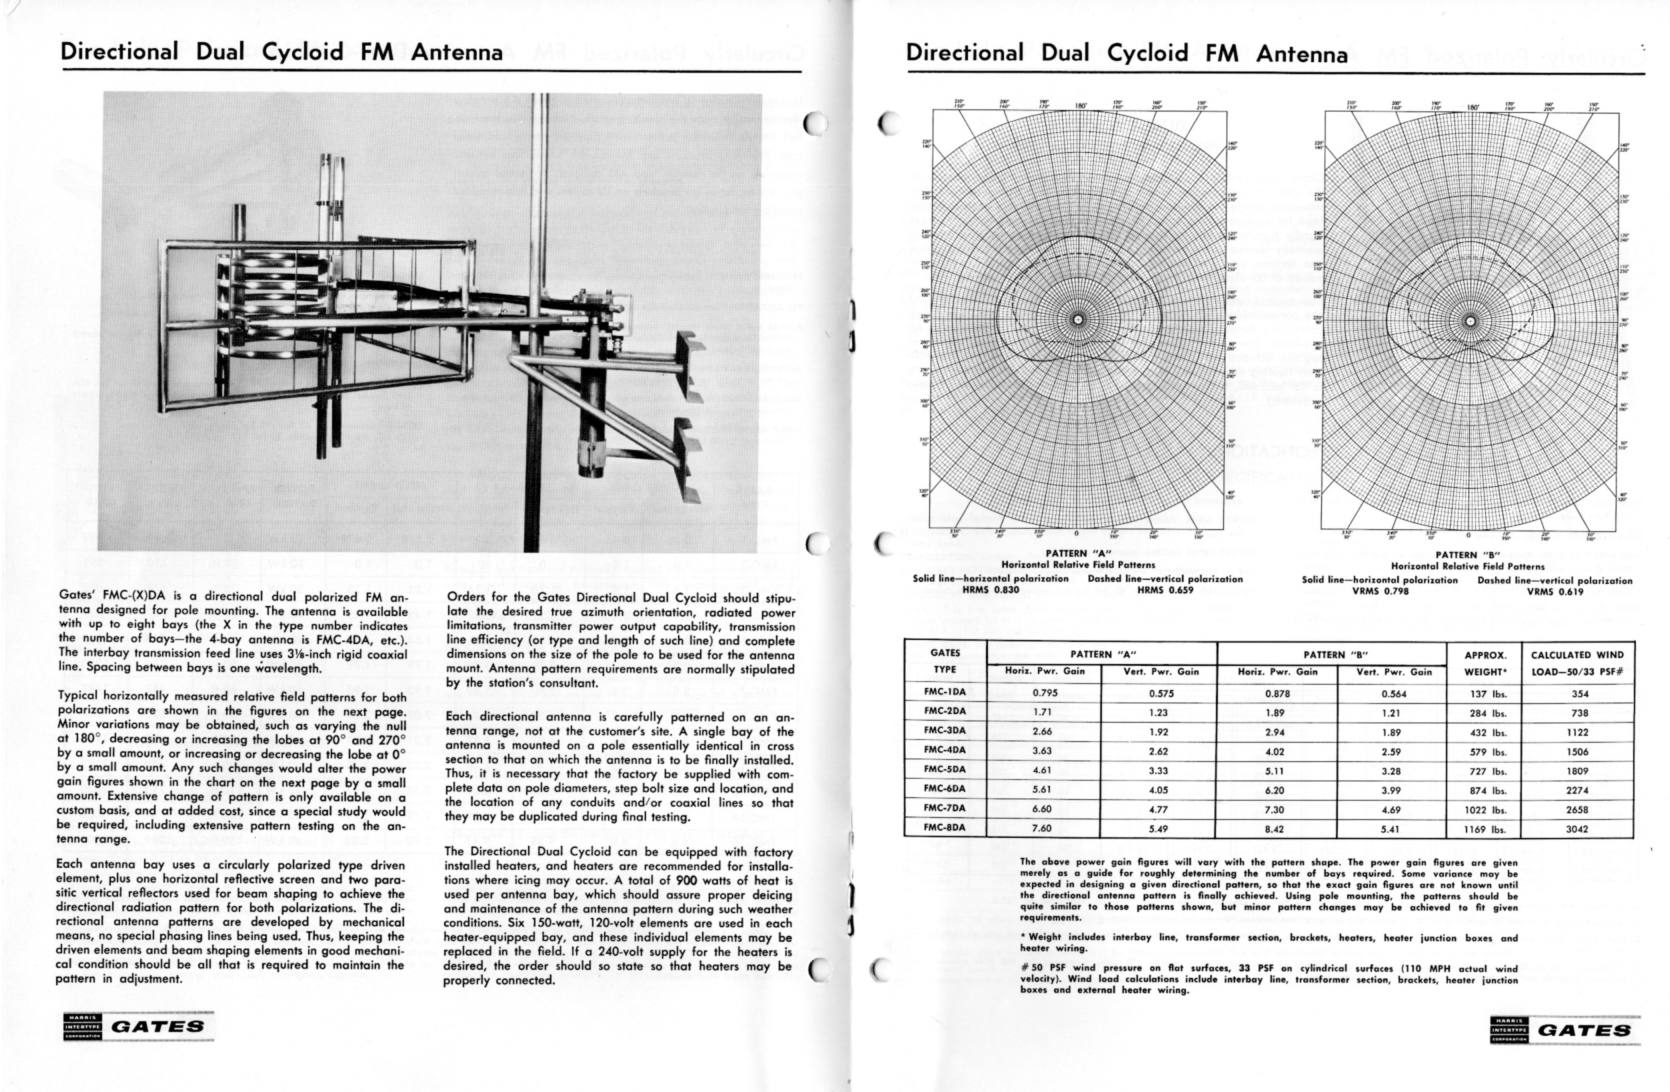 The brochure for the FM Antennas<br>Page 6 -7